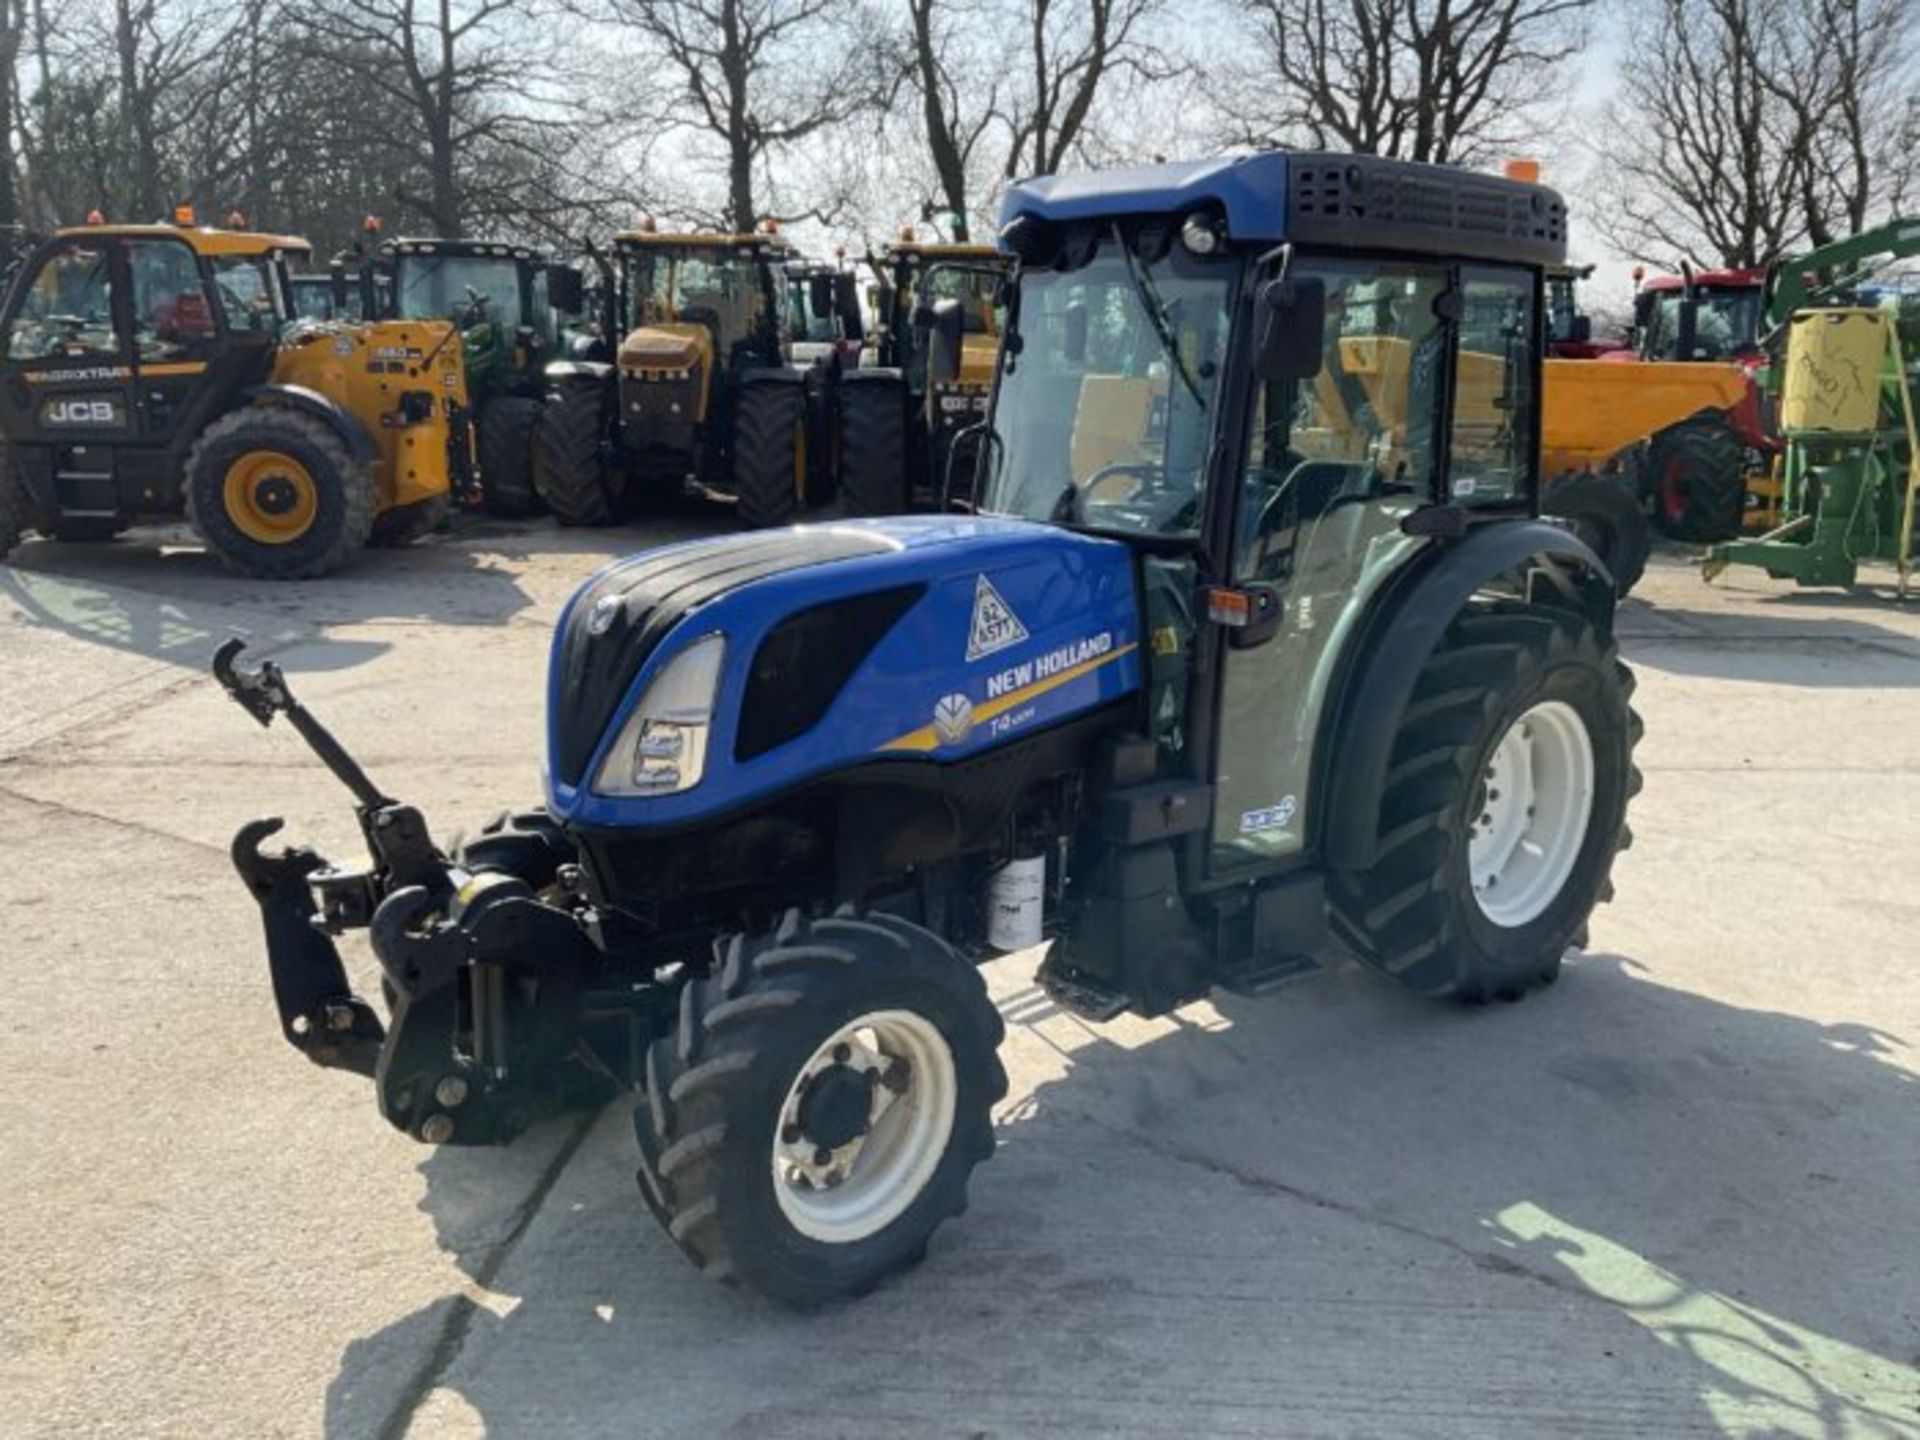 YEAR 2018 NEW HOLLAND T4.100N. FRONT LINKAGE. FRONT P.T.O. SUPER STEER. 3 SPOOLS. AIR CON - Bild 2 aus 11